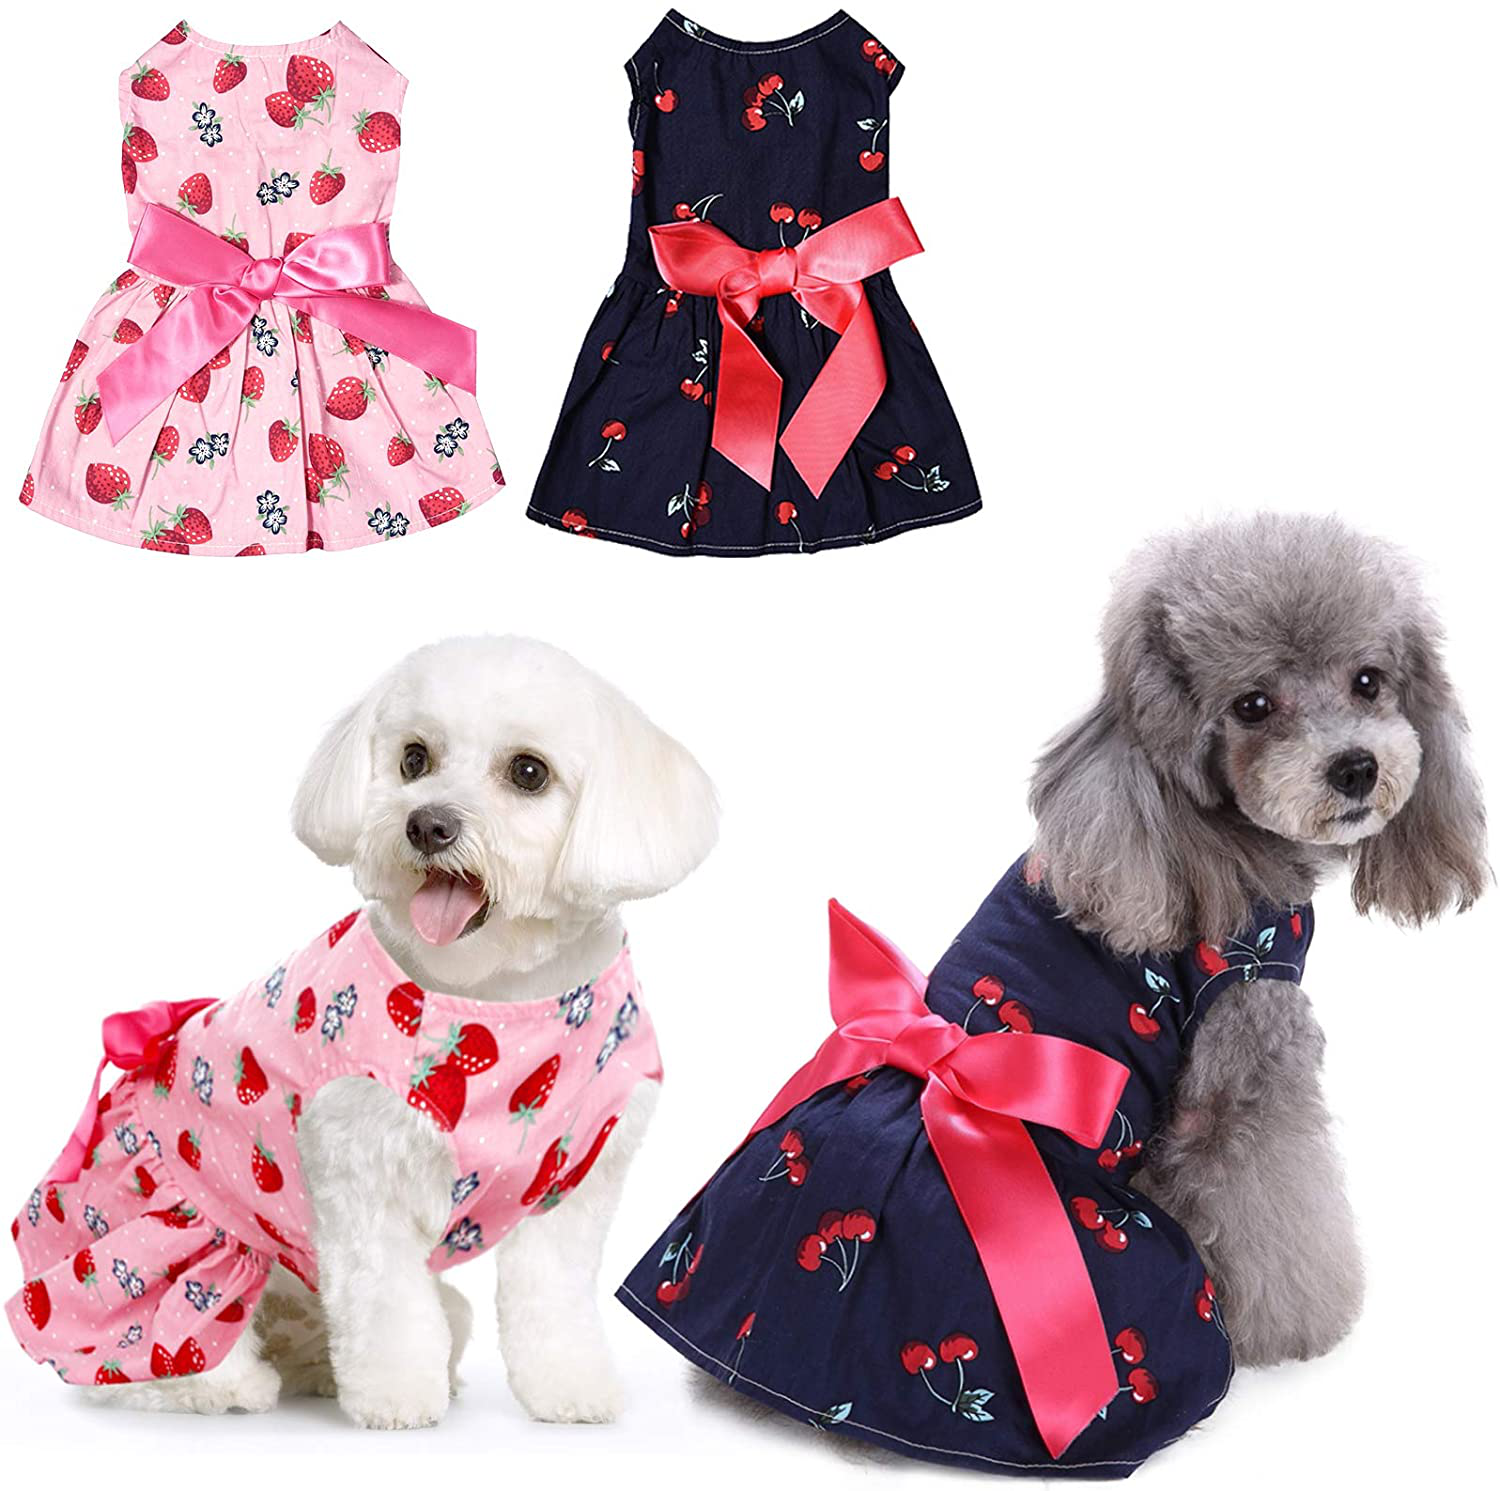 KOESON 2 Pack Dog Dresses Pet Princess Skirts with Ribbon Bowknot, Cute Puppy Sundress Spring Summer Shirts Vest for Small Dogs Cats, Pet Apparel Clothes Doggie Costume for Wedding Holiday Birthday